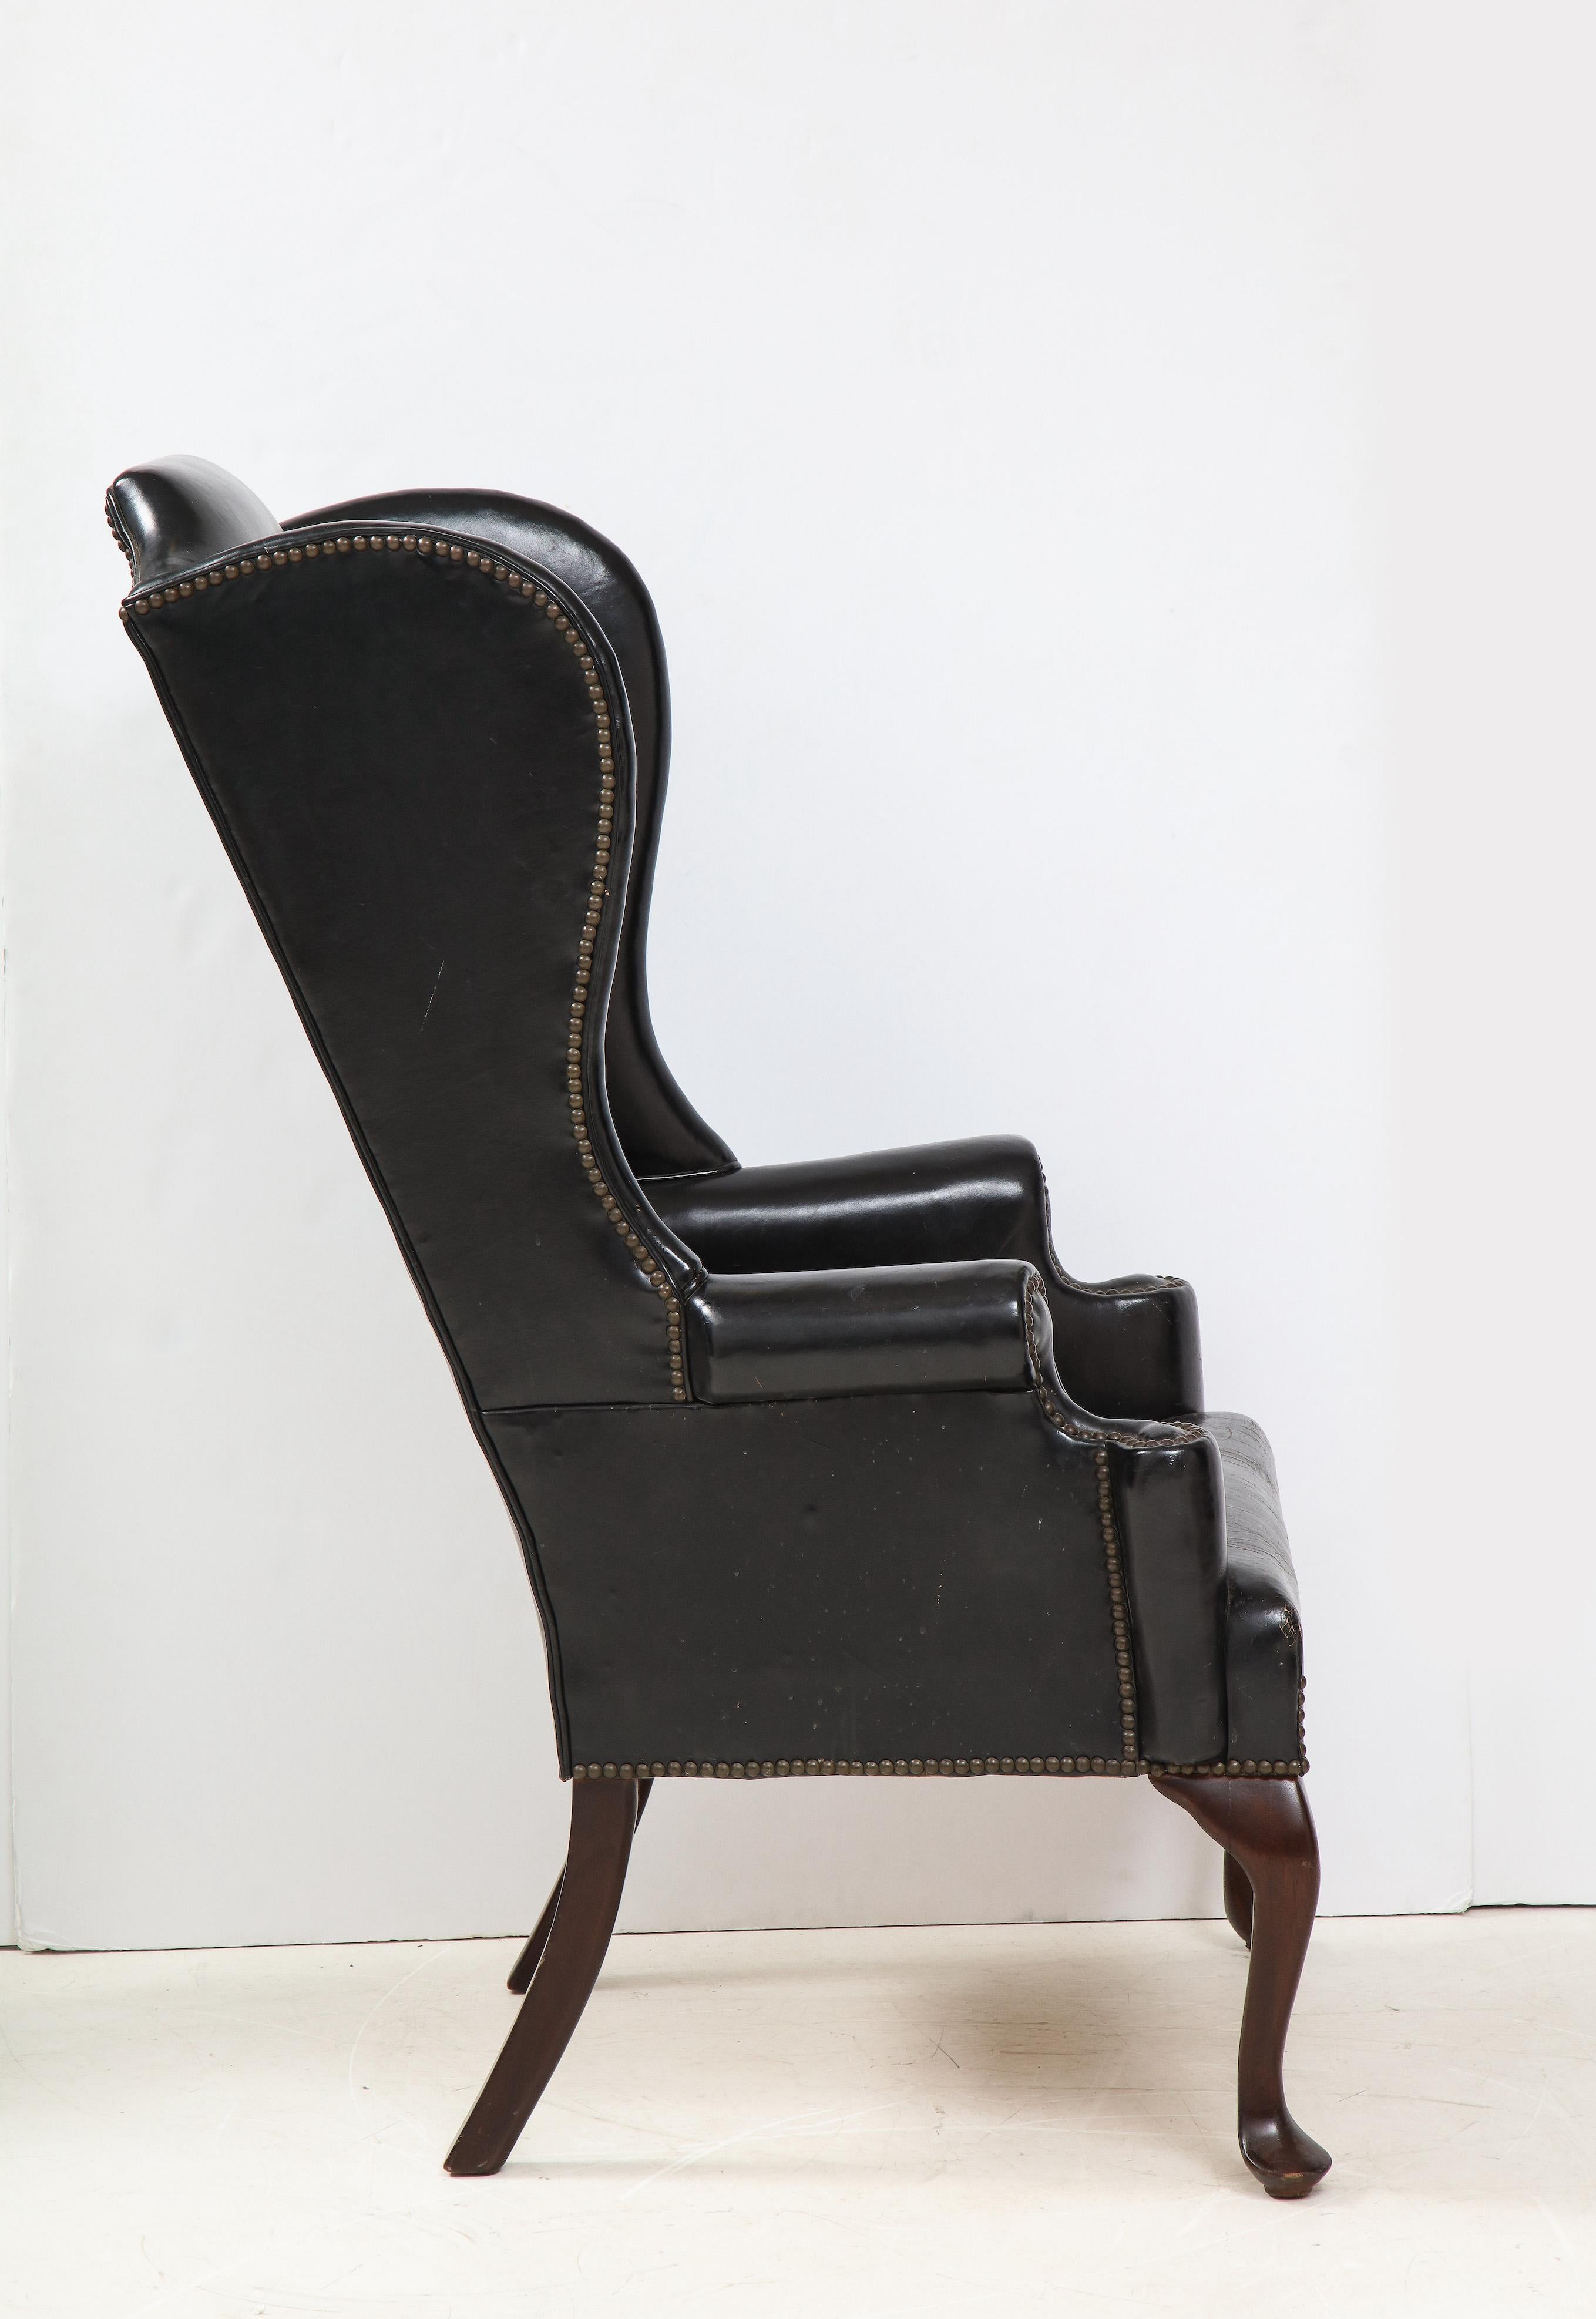 English George II Style Mahogany and Black Leather Upholstered Wing Chair